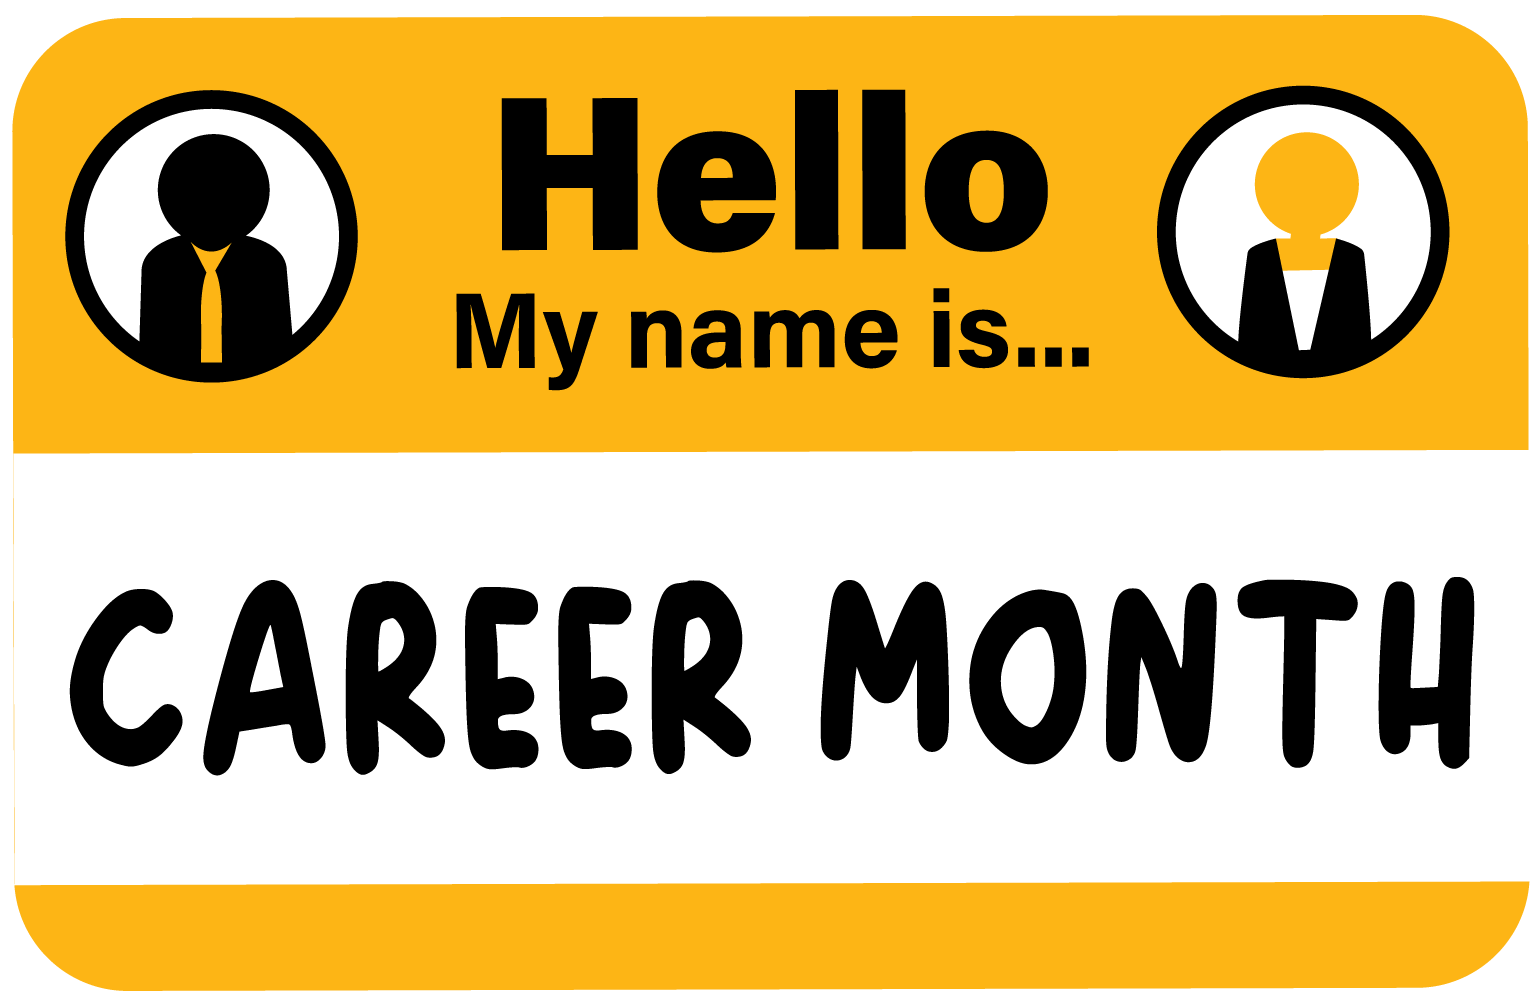 Hello, My Name is... Career Month
